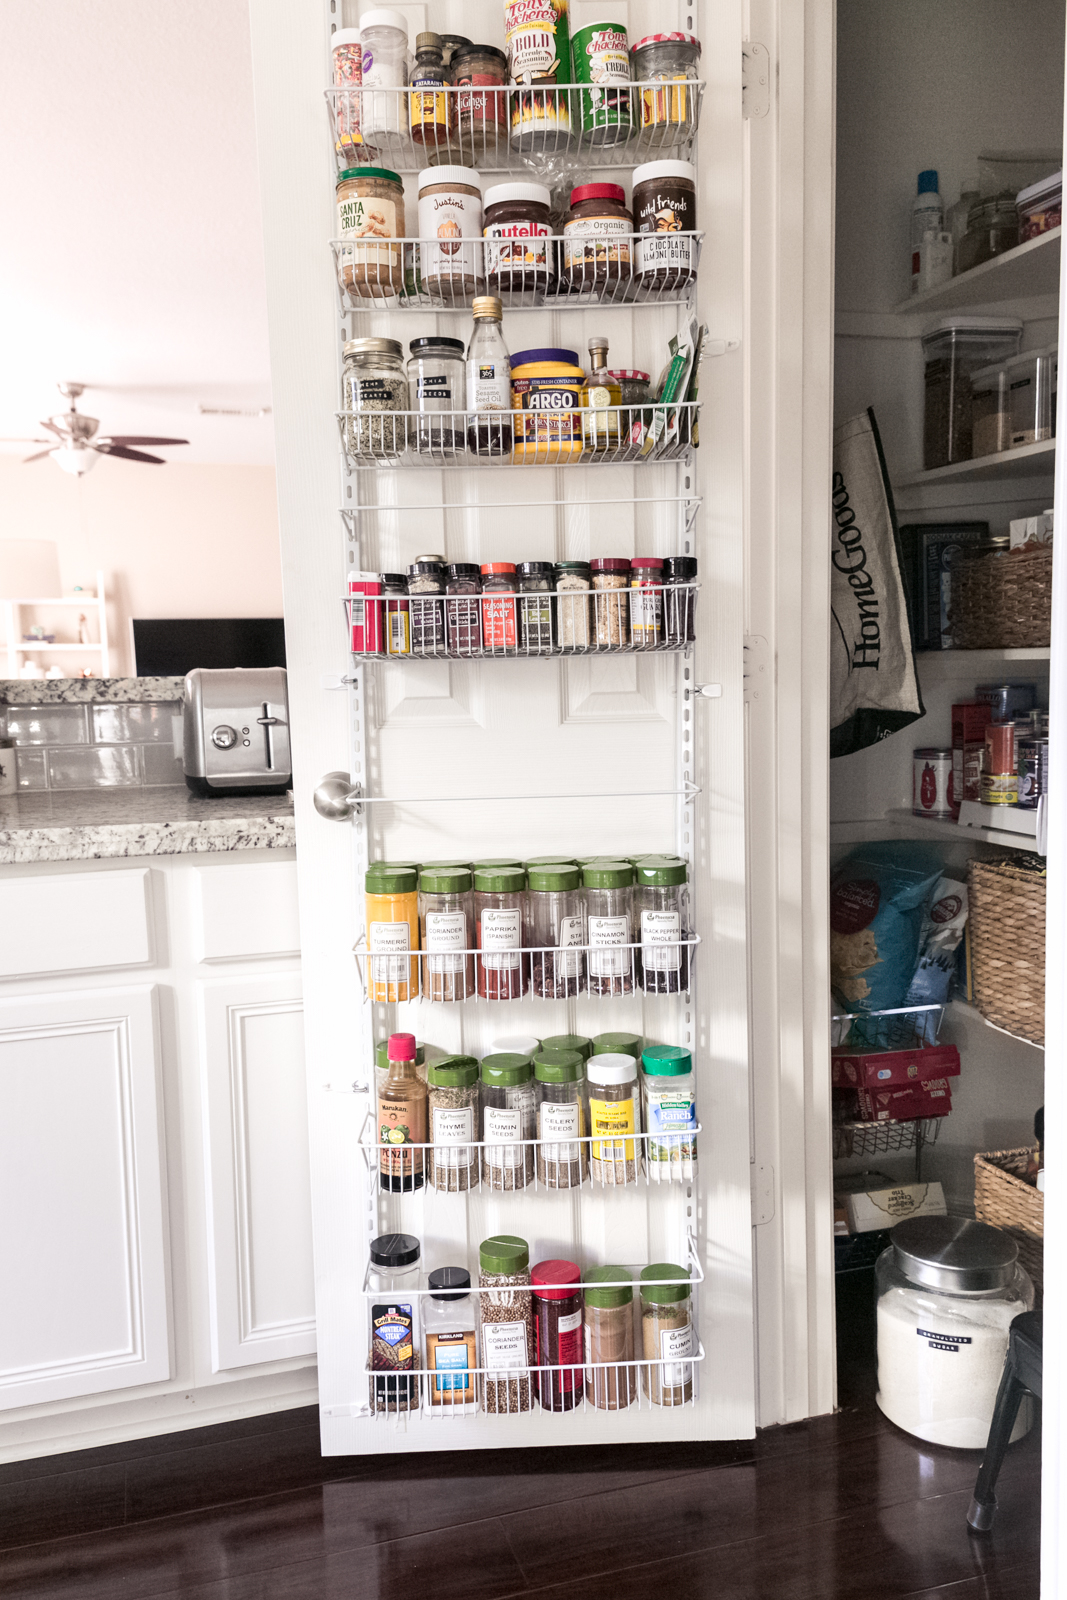 door organizer holding containers of spices with green lids